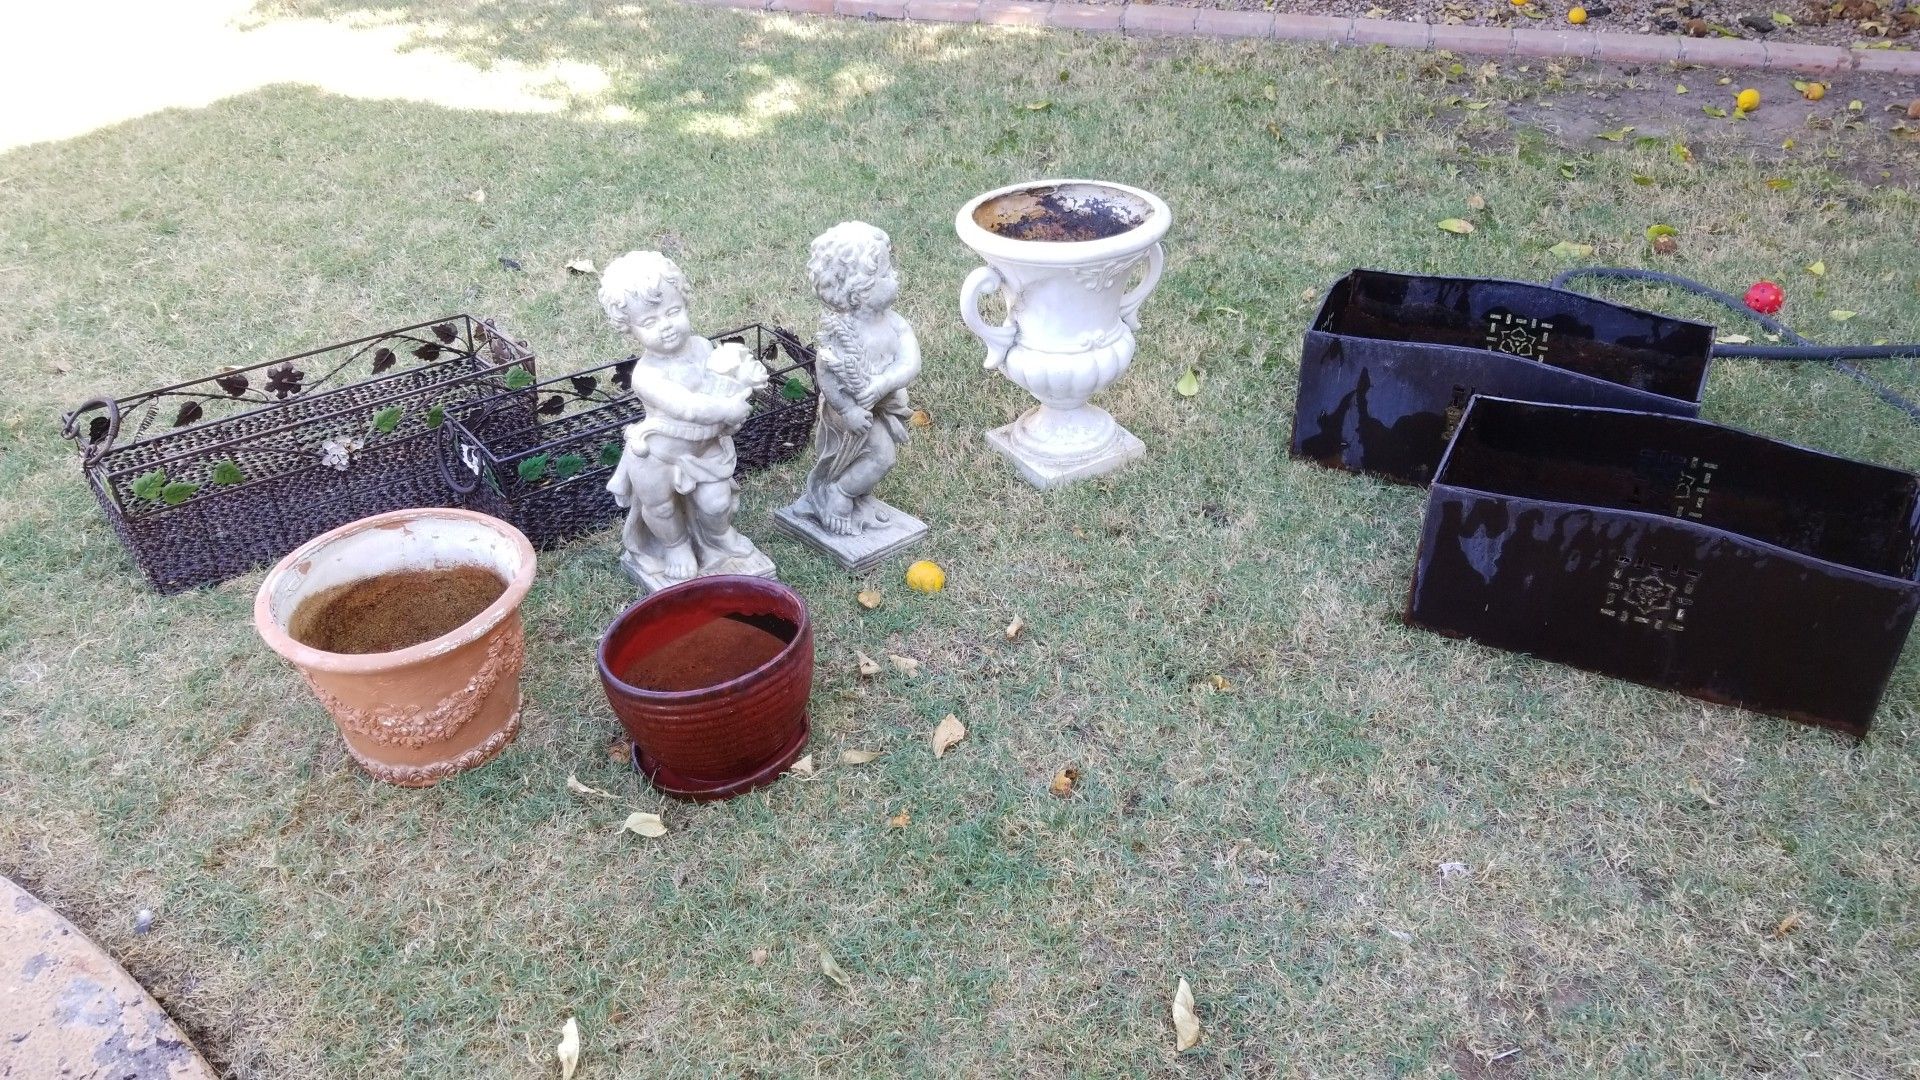 Outdoor decor pots and statues